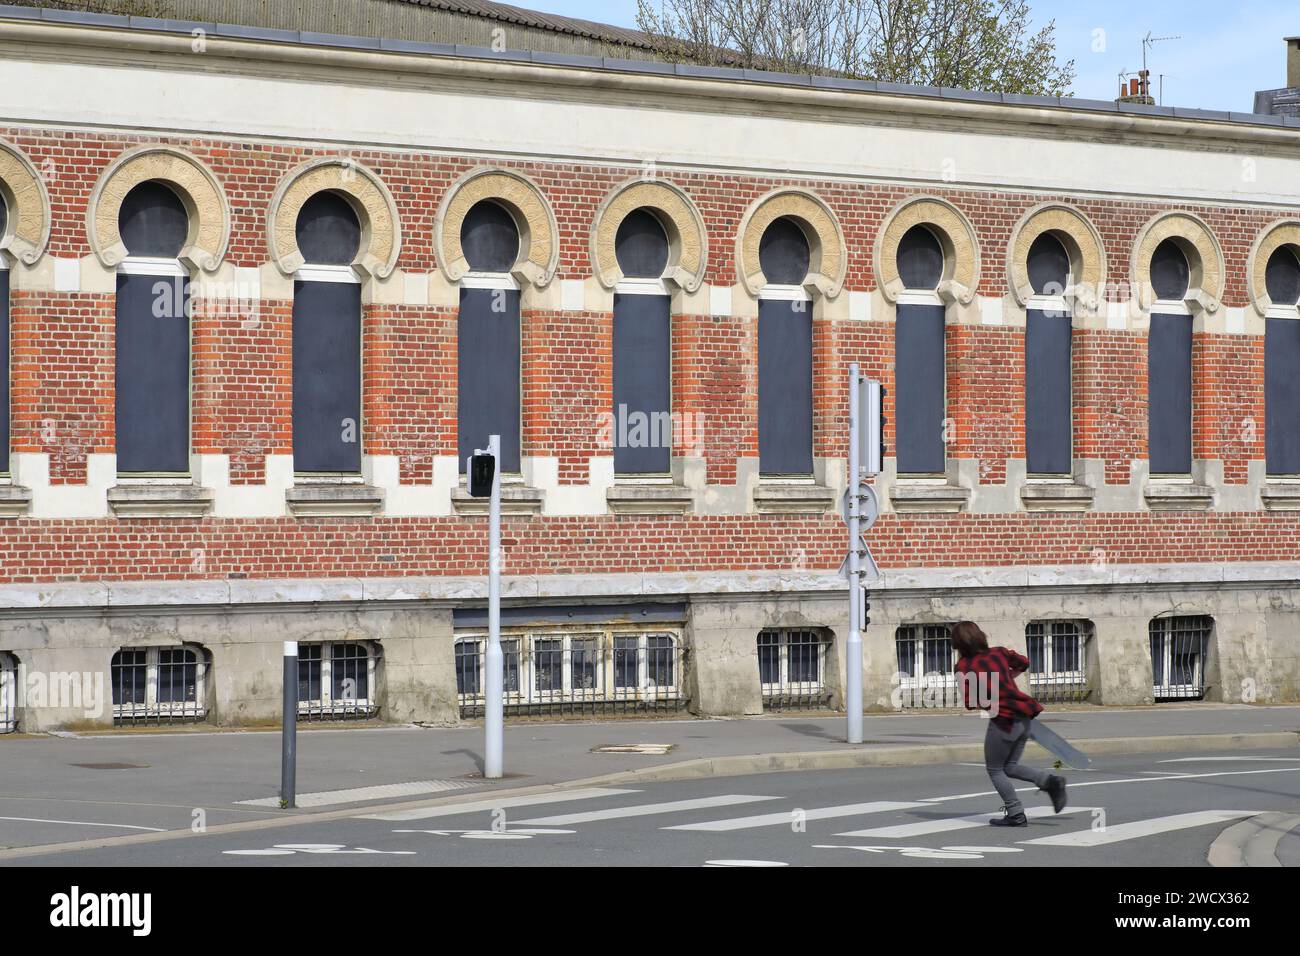 France, Nord, Dunkirk, pedestrian crossing in front of the former Bains Dunkerquois (1896) in Moorish style according to plans by architects Louis Gilquin, Charles Boidin and Albert Baert with swimming pool, wash houses, bathtubs... Stock Photo